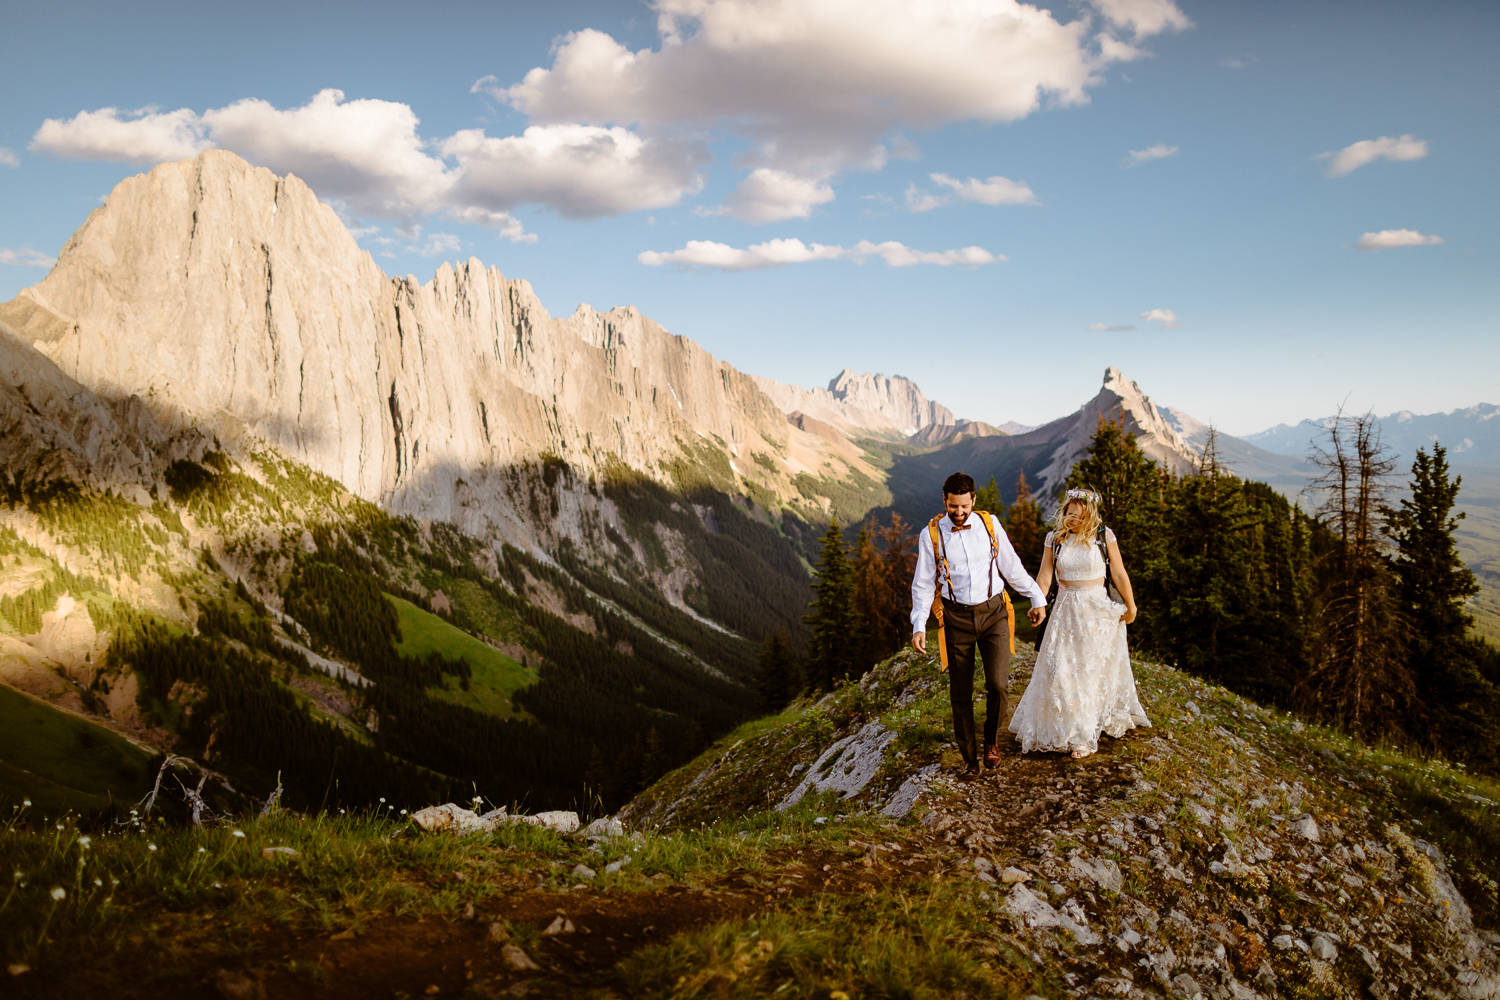 How to look good hiking for an adventure elopement